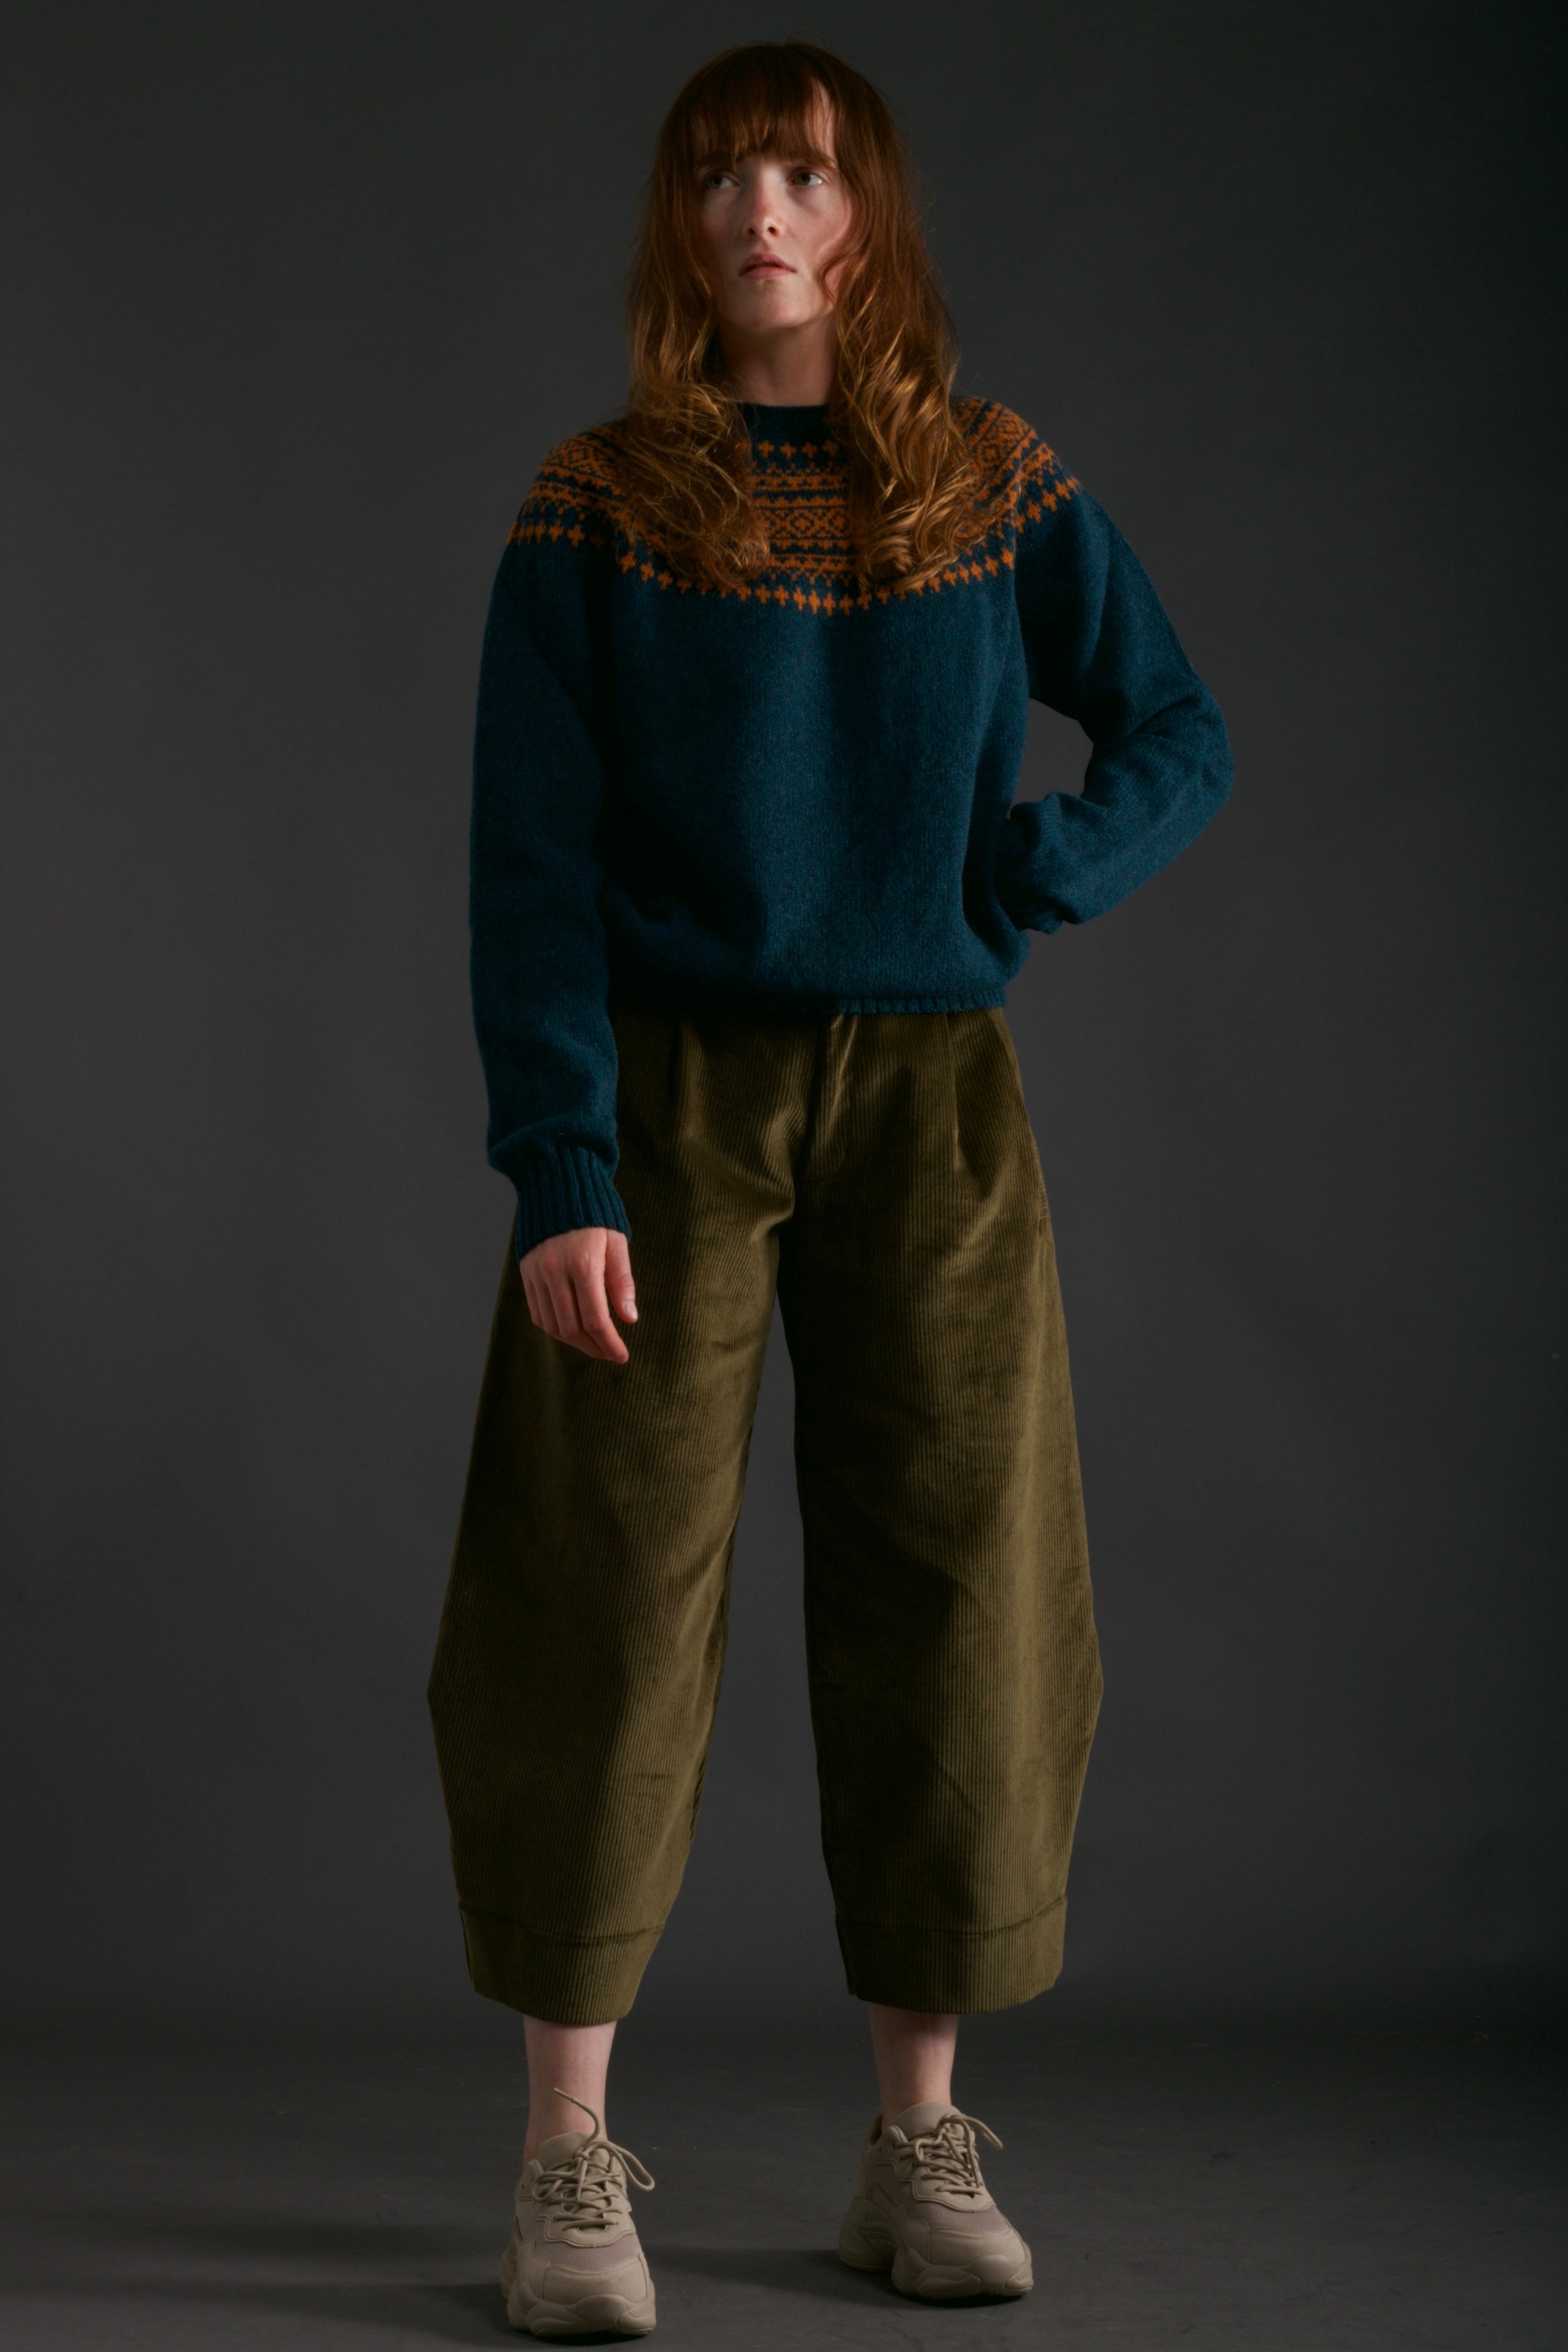 Woman wears Carrier Company Shetland Yoke Jumper in ginger and Teal with Dutch Trouser in Corduroy